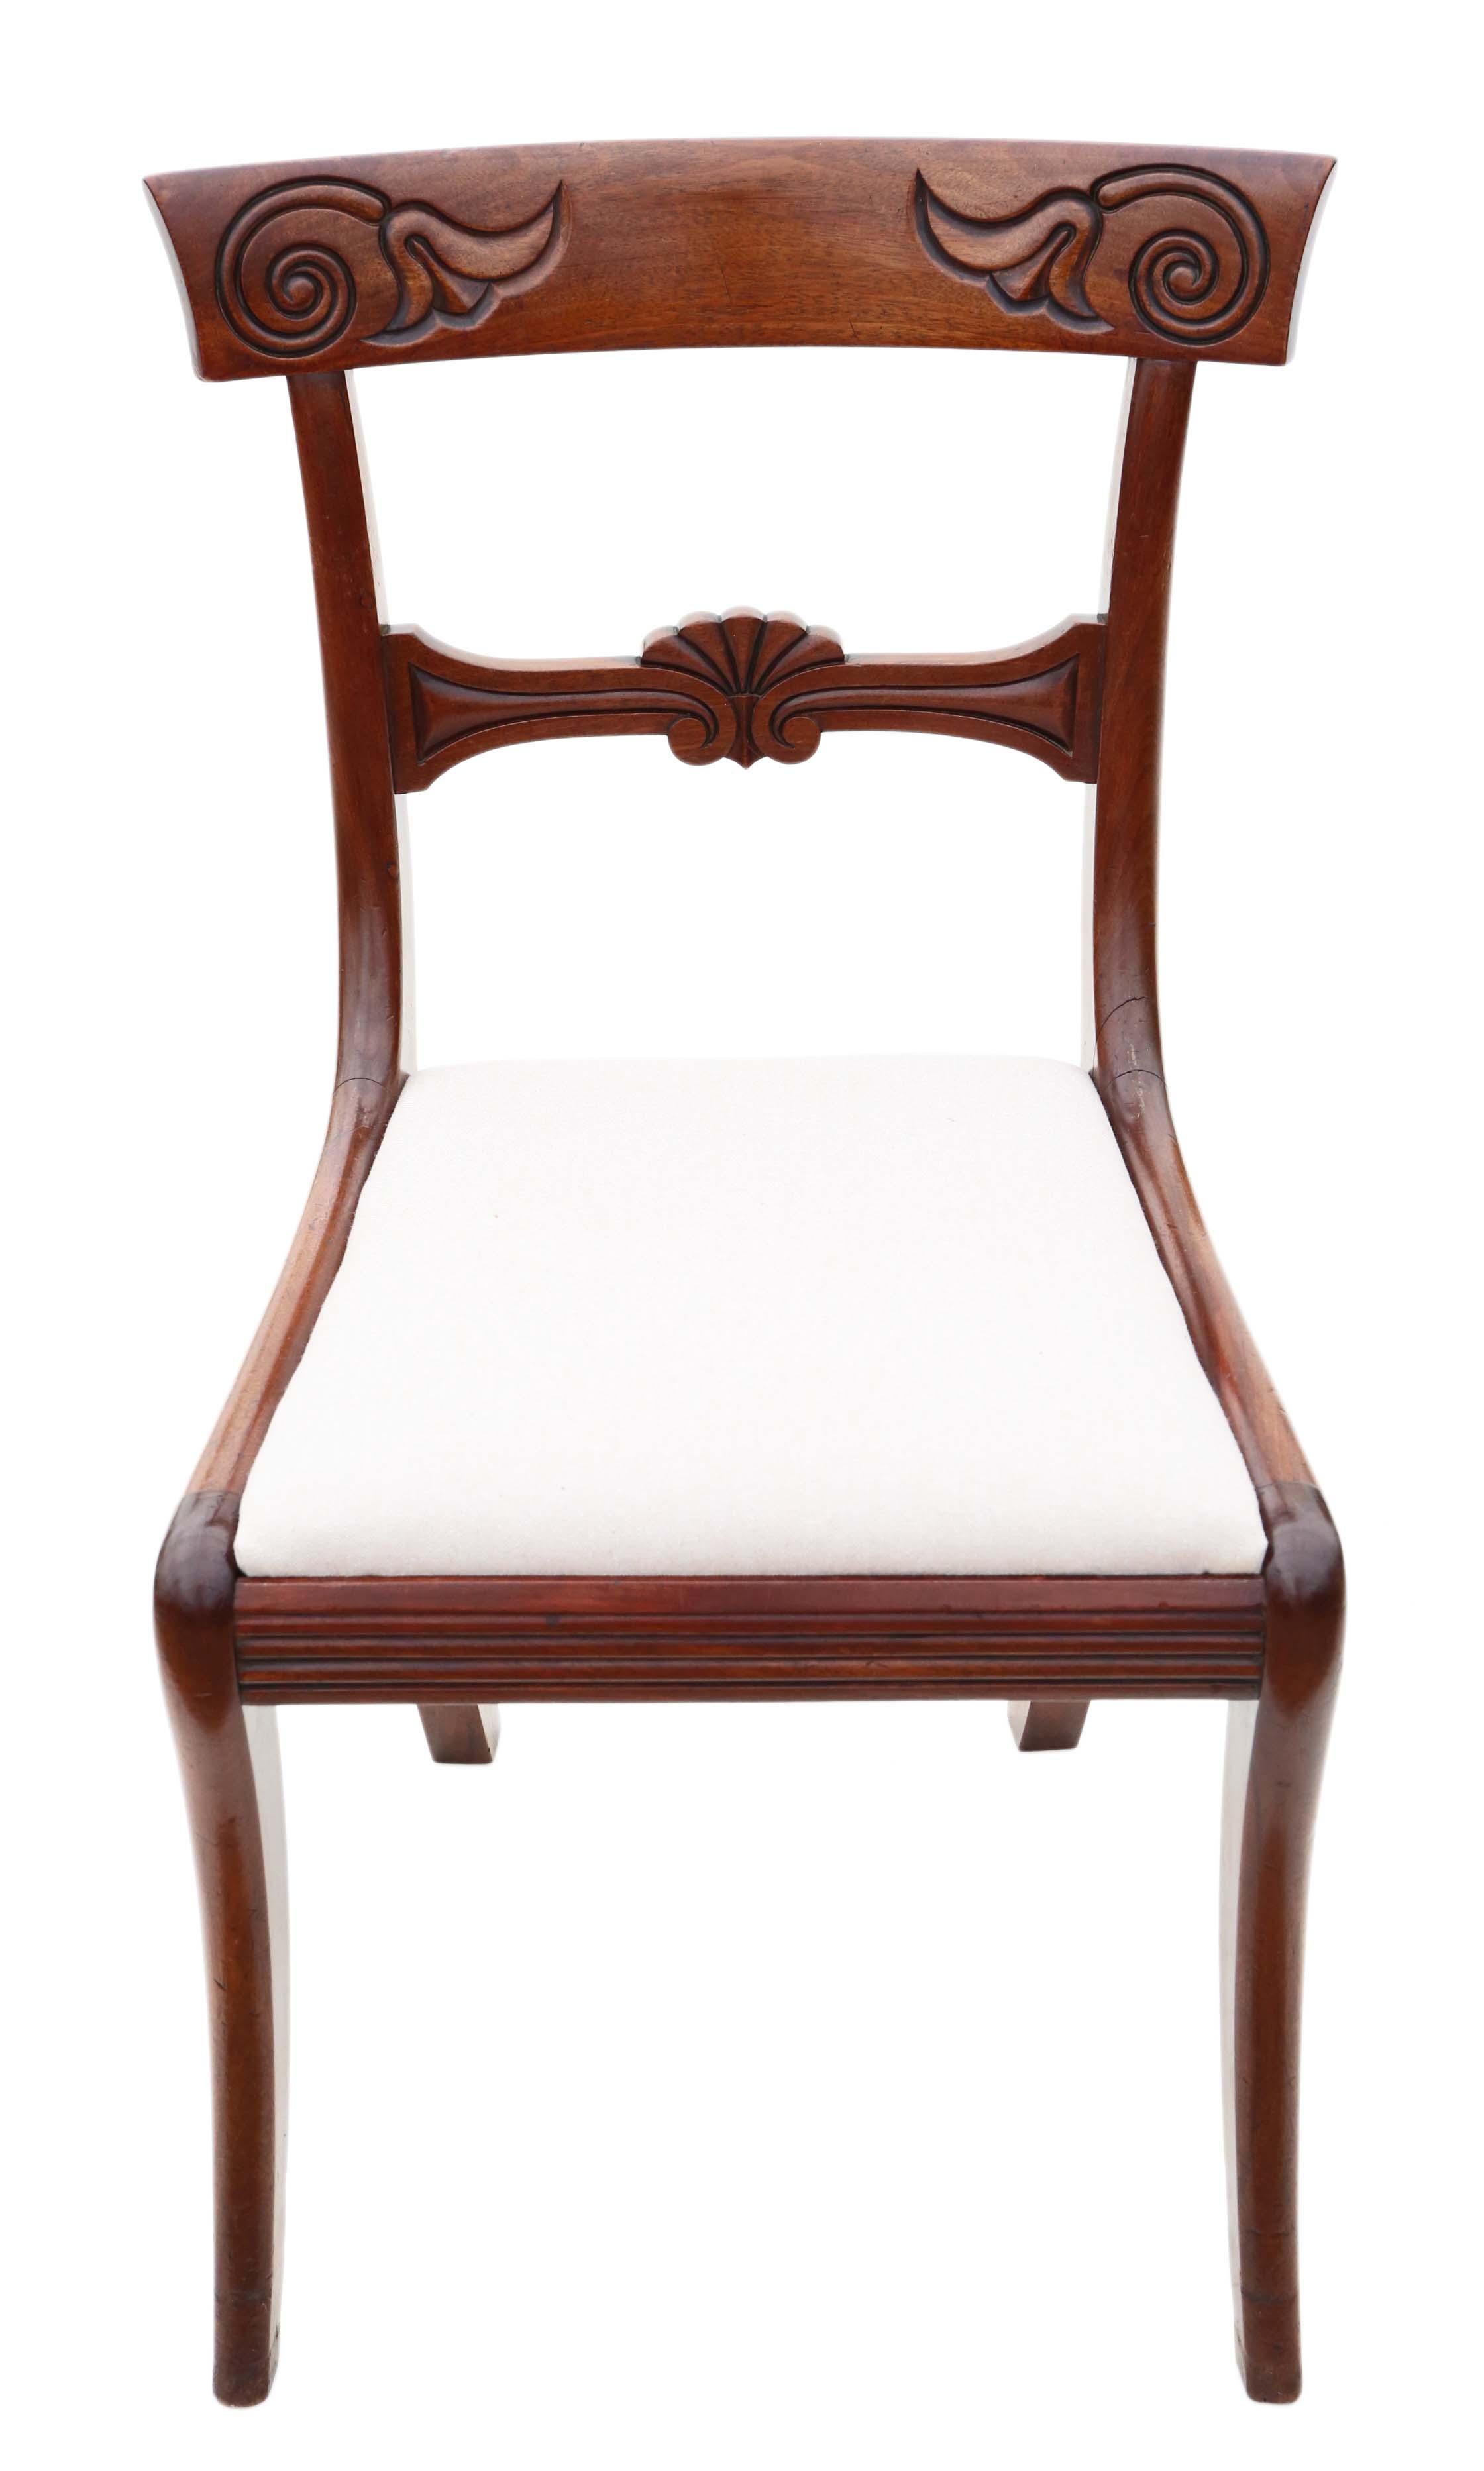 Regency Cuban Mahogany Dining Chairs: Set of 6 (4+2), Antique Quality, C1825 For Sale 6